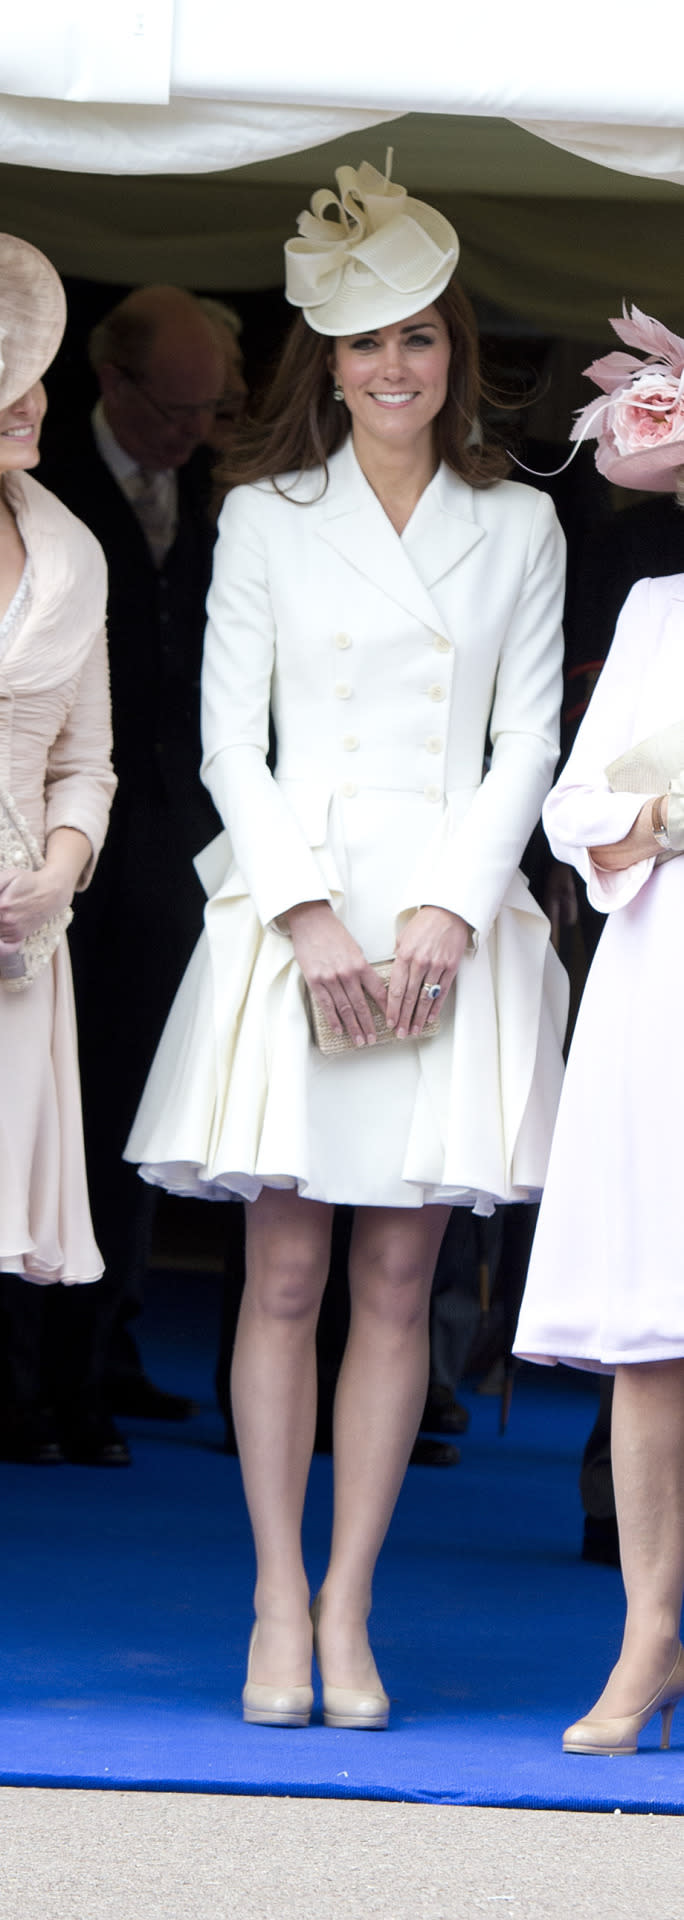 <p>Kate went for a white Alexander McQueen coat for the annual Order of the Garter service. She accessorised with nude pieces from L.K. Bennett and a chic white hat by Jane Corbett. </p><p><i>[Photo: PA]</i></p>